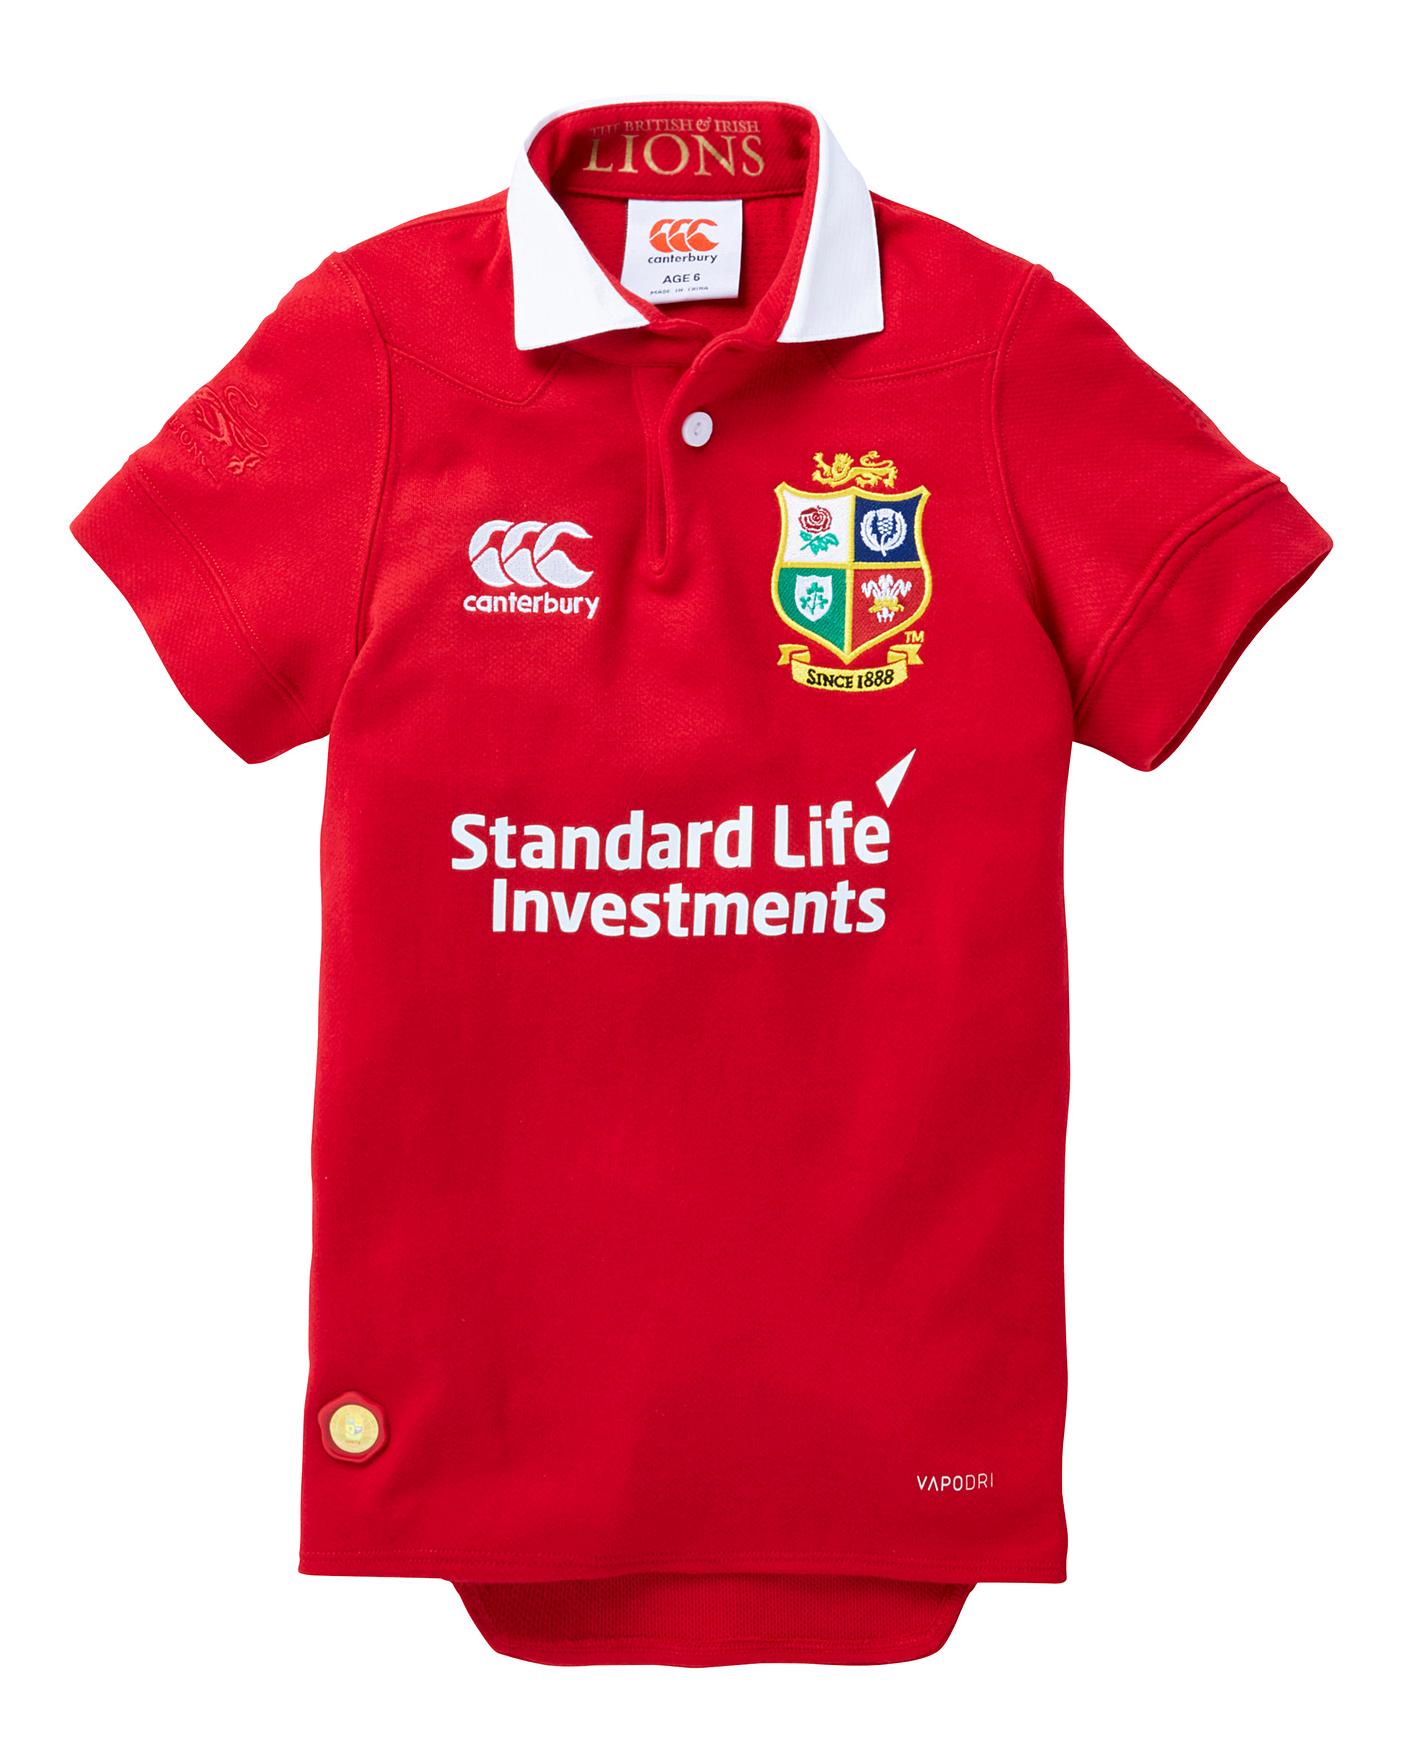 lions 1888 jersey